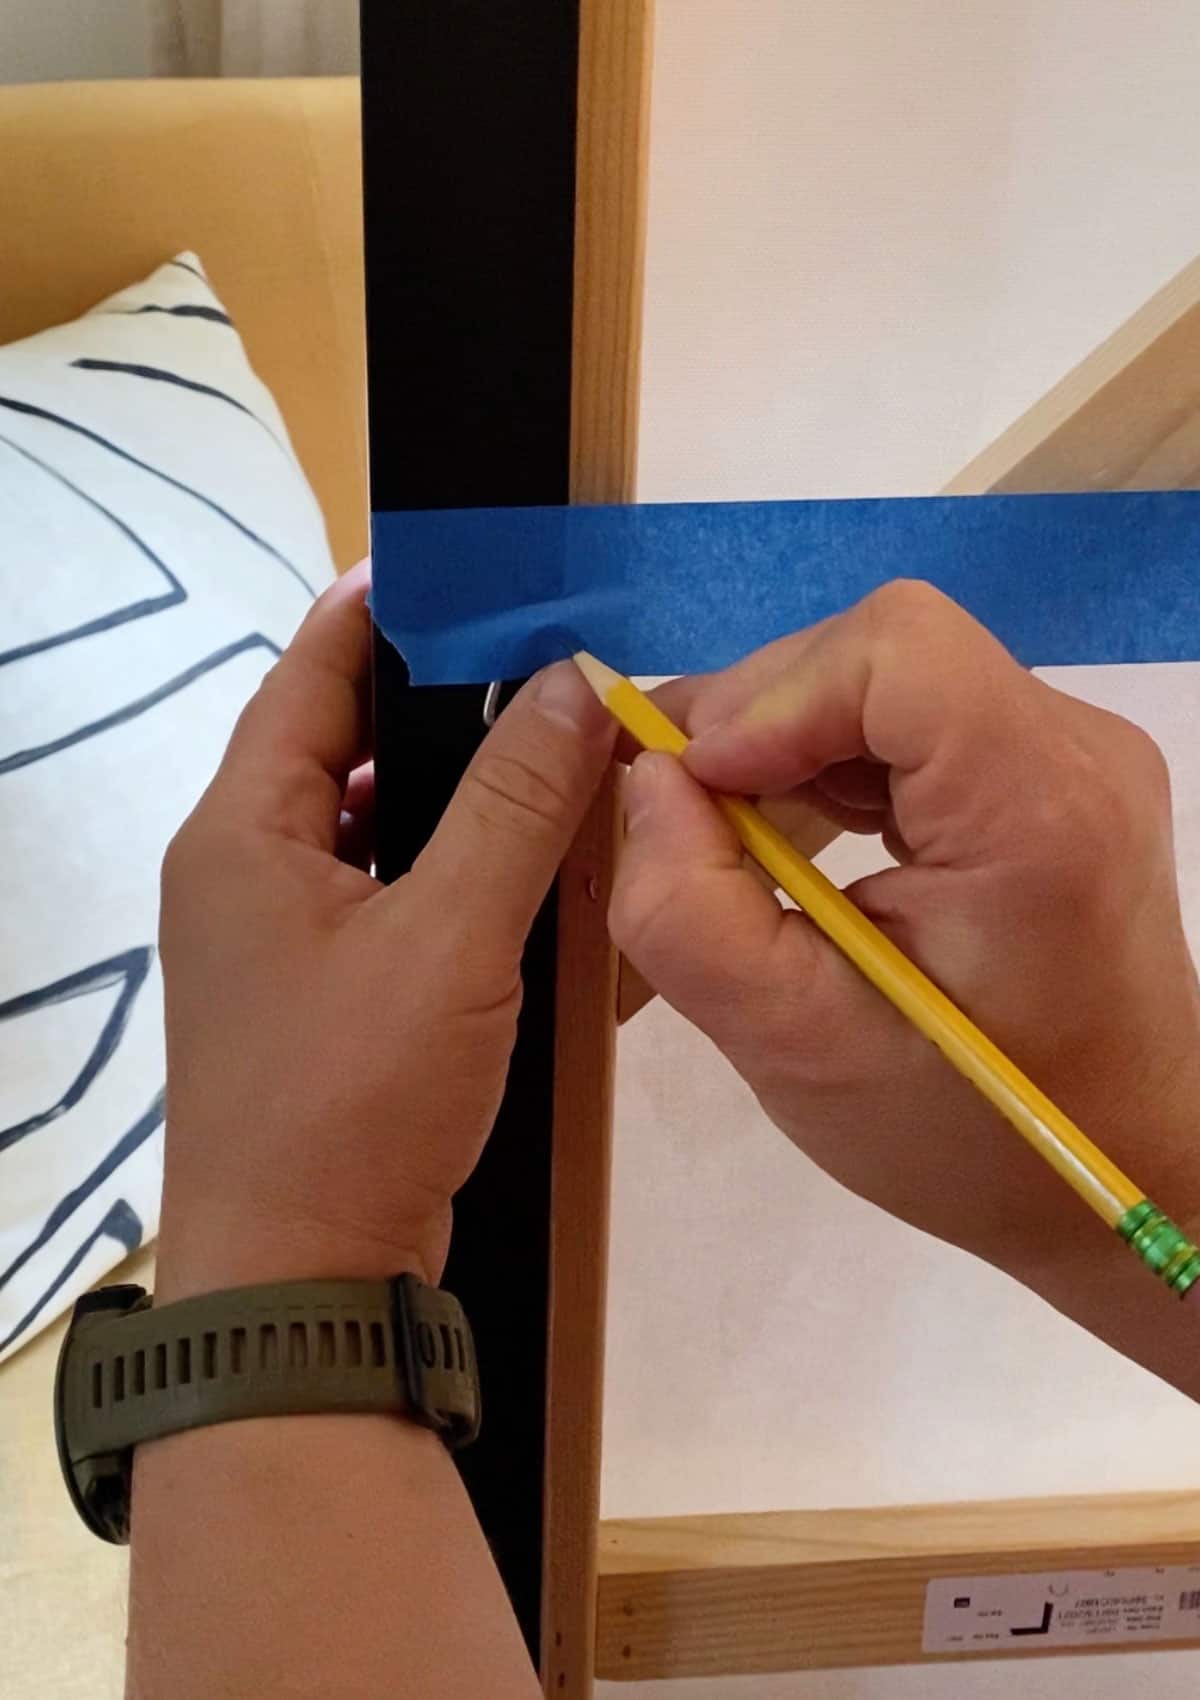 How To Hang A Picture With 2 Hooks Using Painter's Tape - Here's is the simple way to hang art with 2 hooks, painter's tape, and a level. 